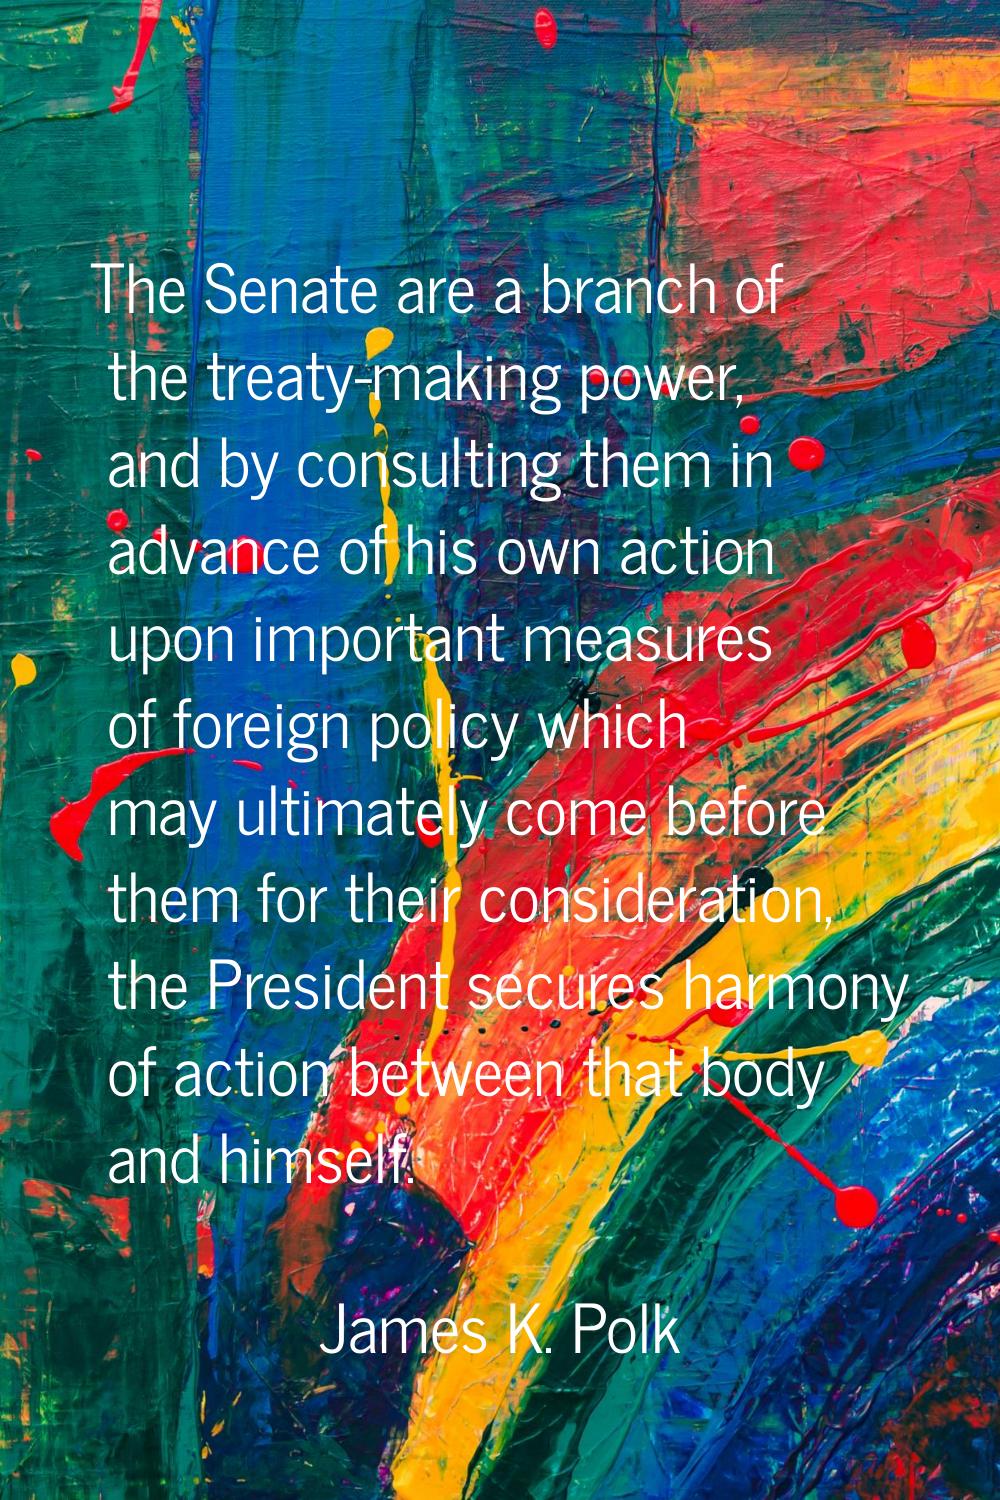 The Senate are a branch of the treaty-making power, and by consulting them in advance of his own ac